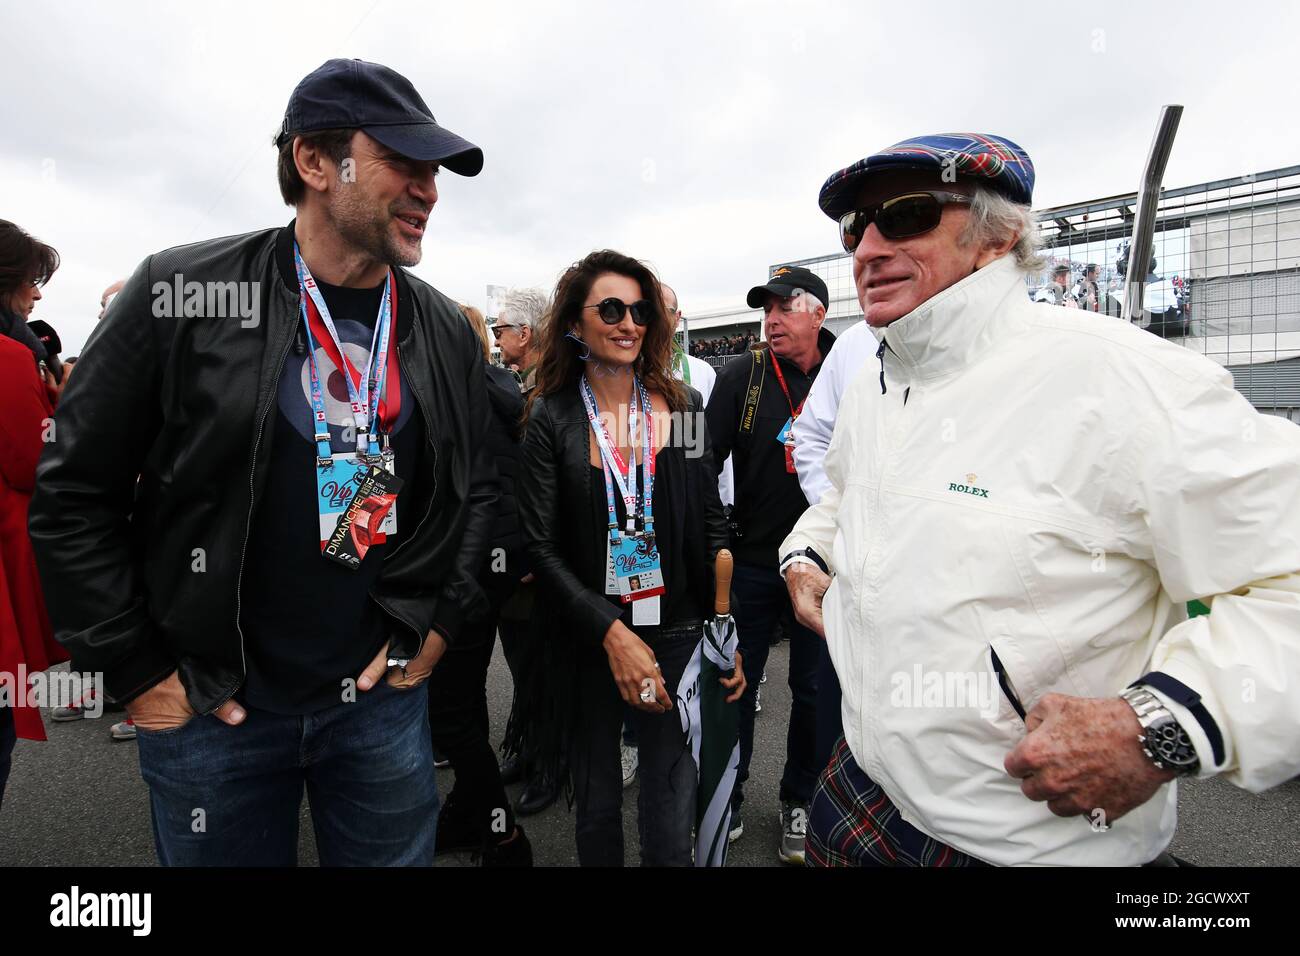 (L to R): Javier Bardem (ESP) Actor with his wife Penelope Cruz (ESP) Actress and Jackie Stewart (GBR) on the grid. Canadian Grand Prix, Sunday 12th June 2016. Montreal, Canada. Stock Photo